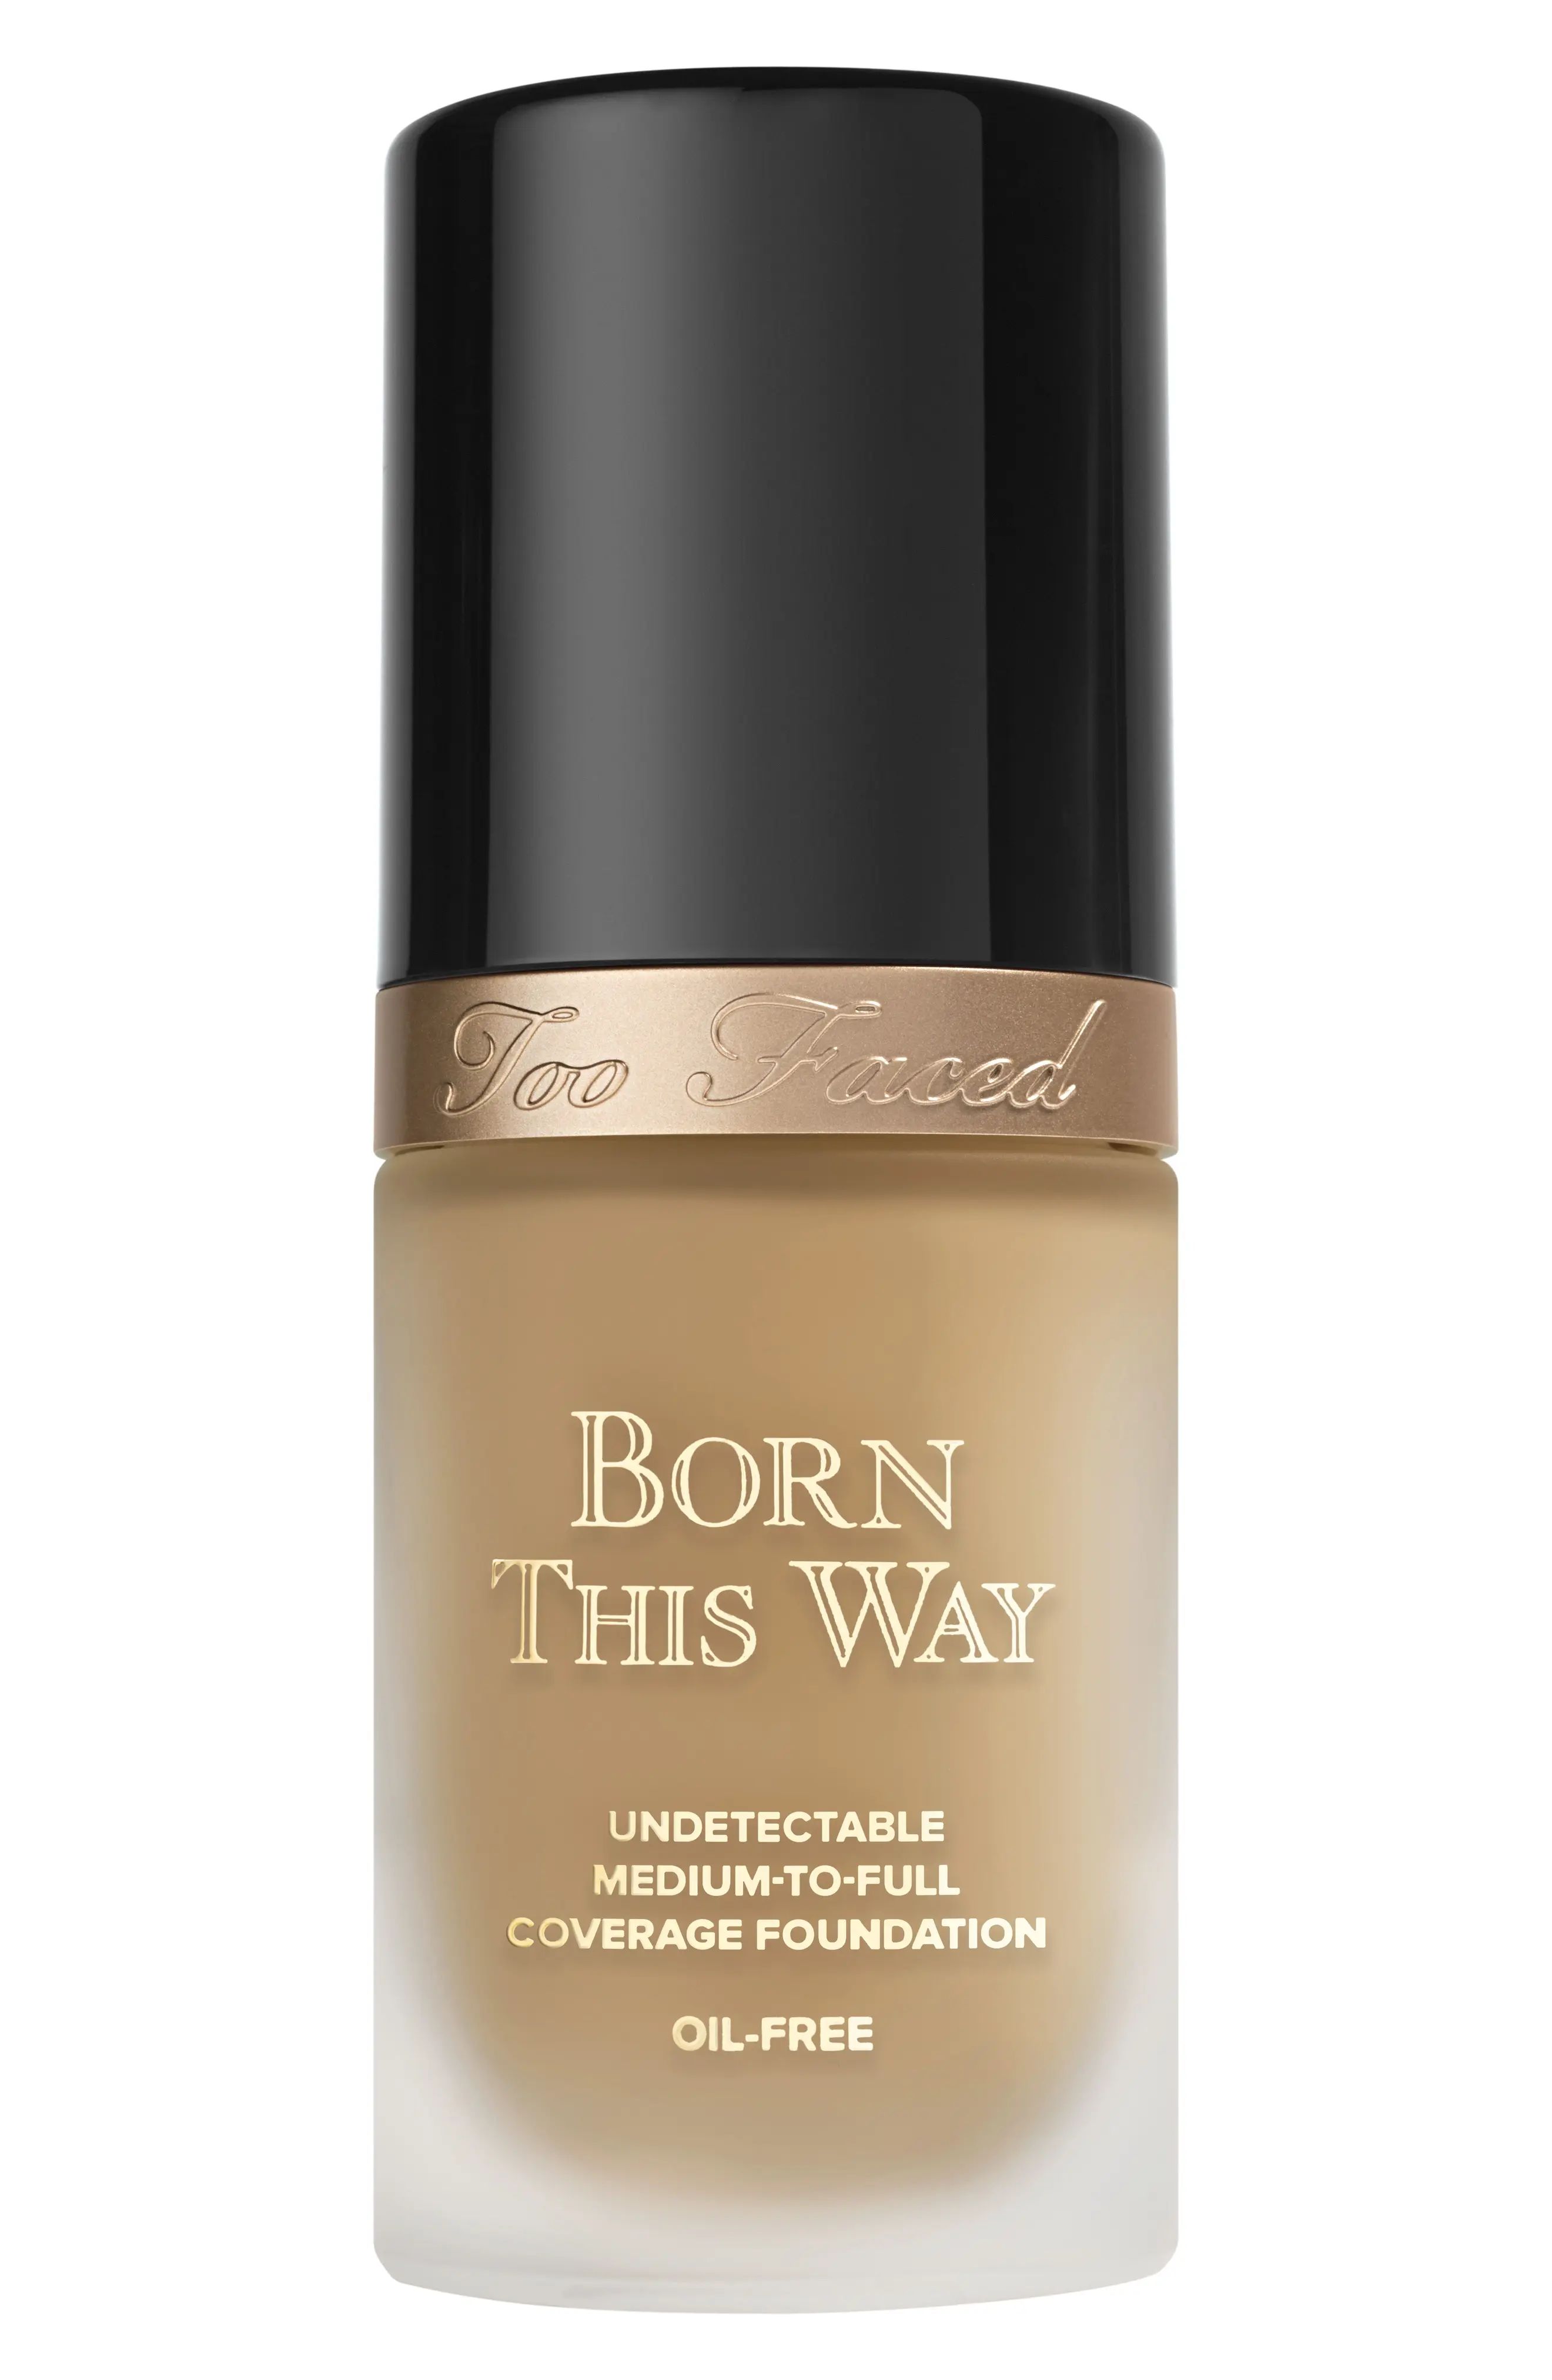 Too Faced Born This Way Foundation - Light Beige | Nordstrom